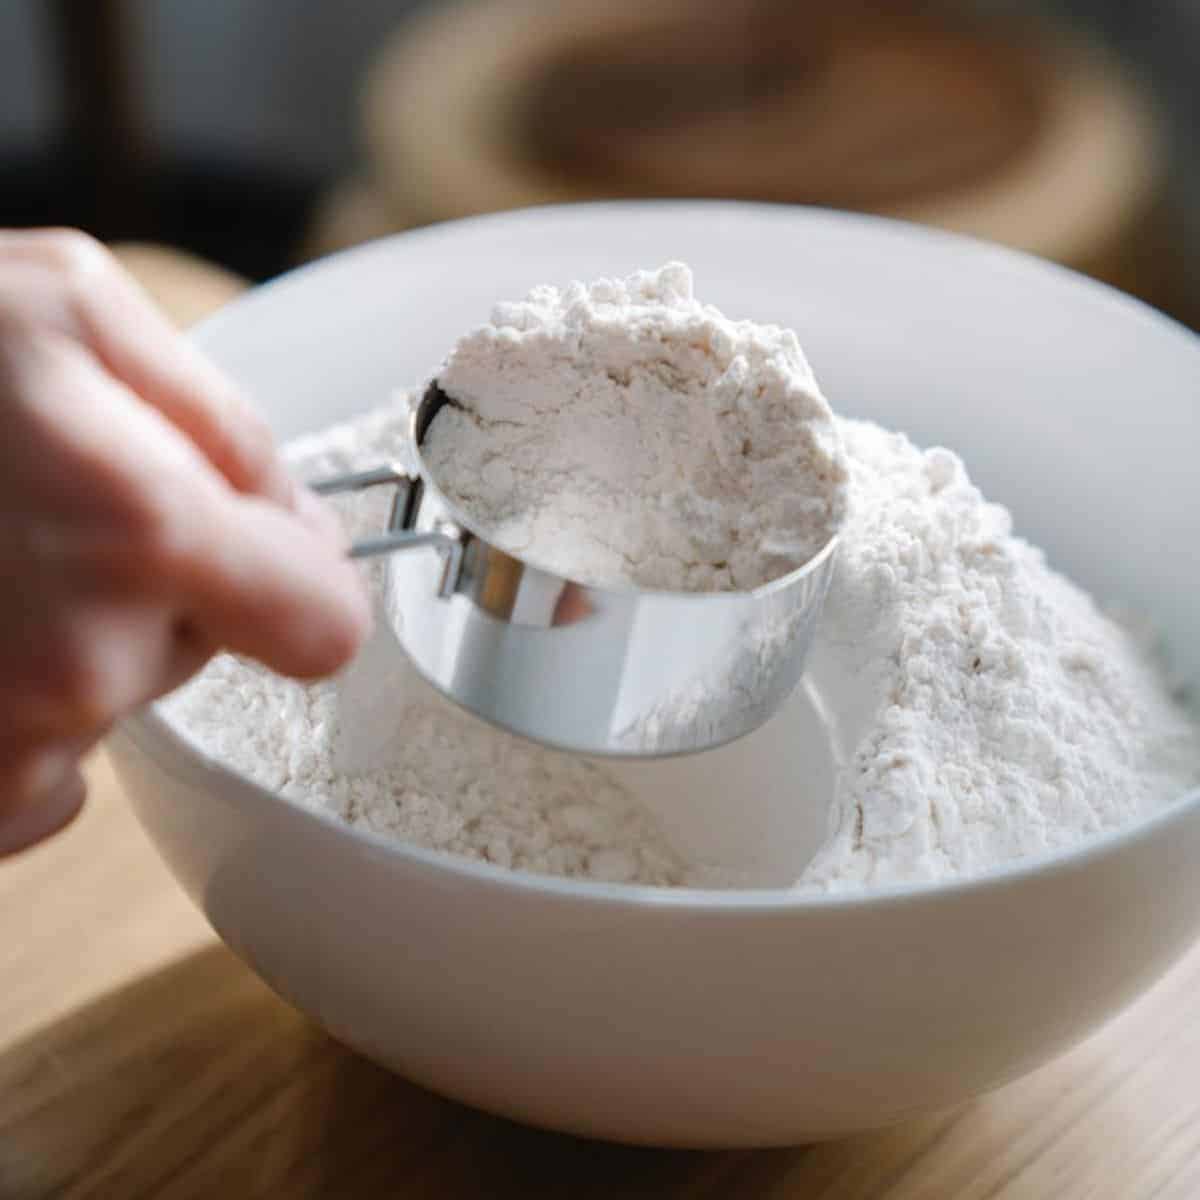 A hand scooping a tapioca flour from a white bowl